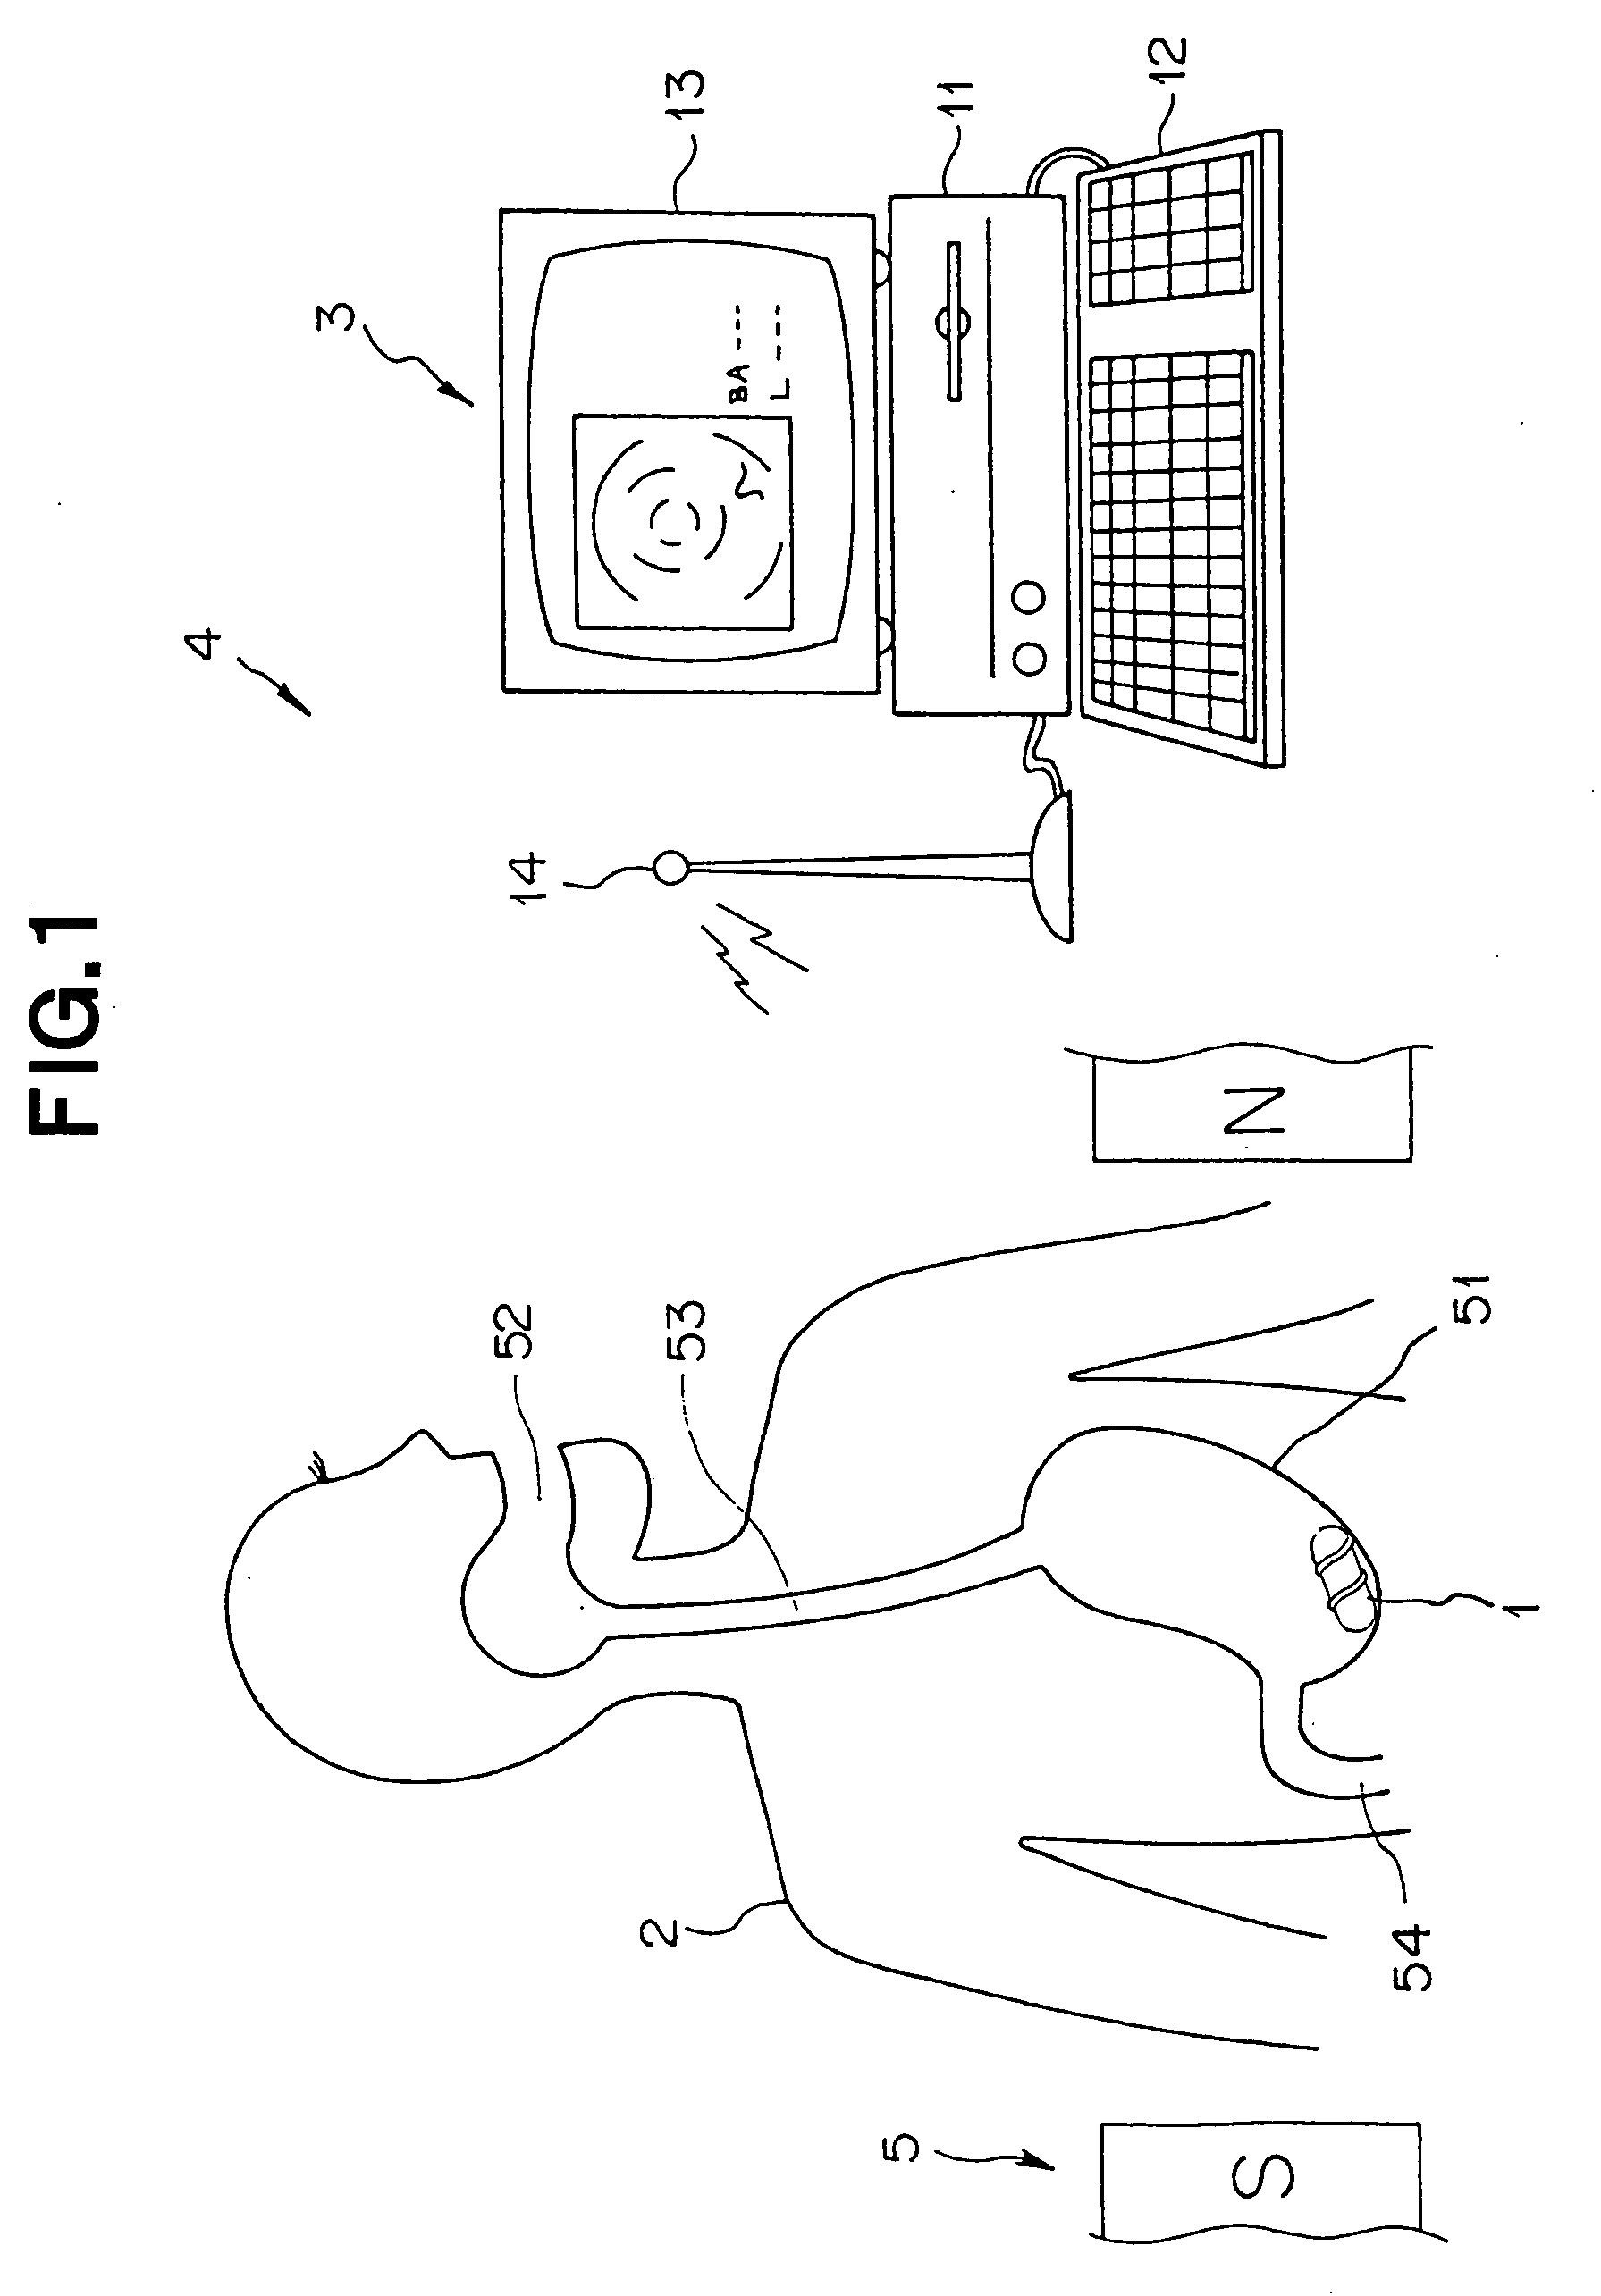 Medical device